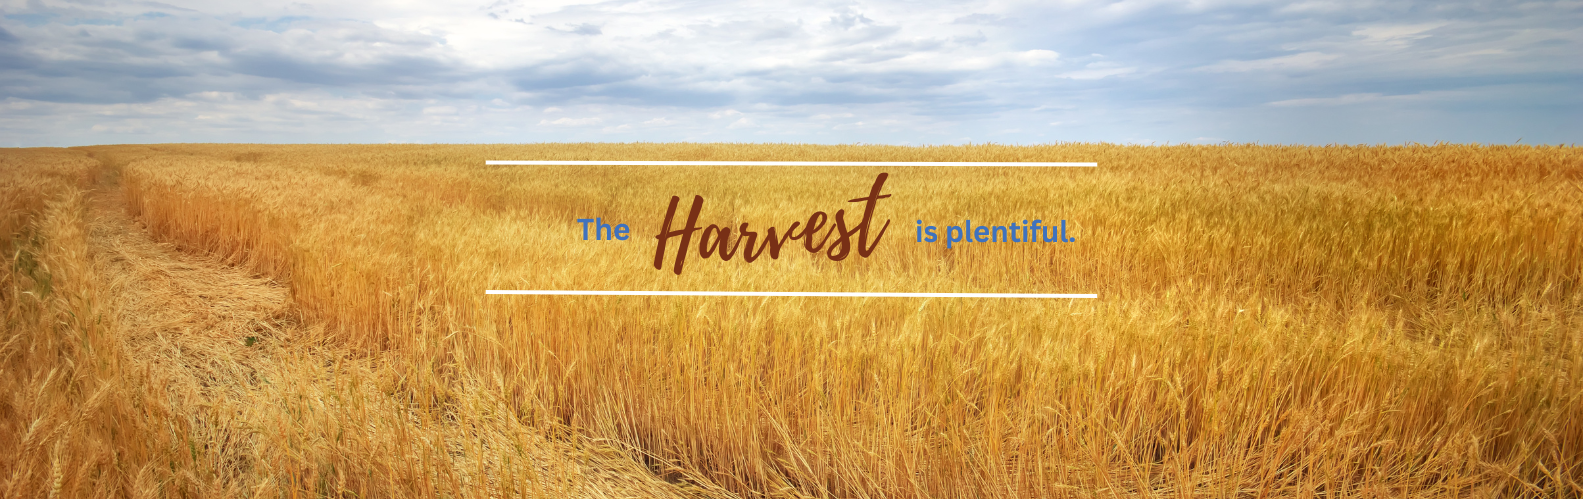 Patience is Required for a Plentiful Harvest